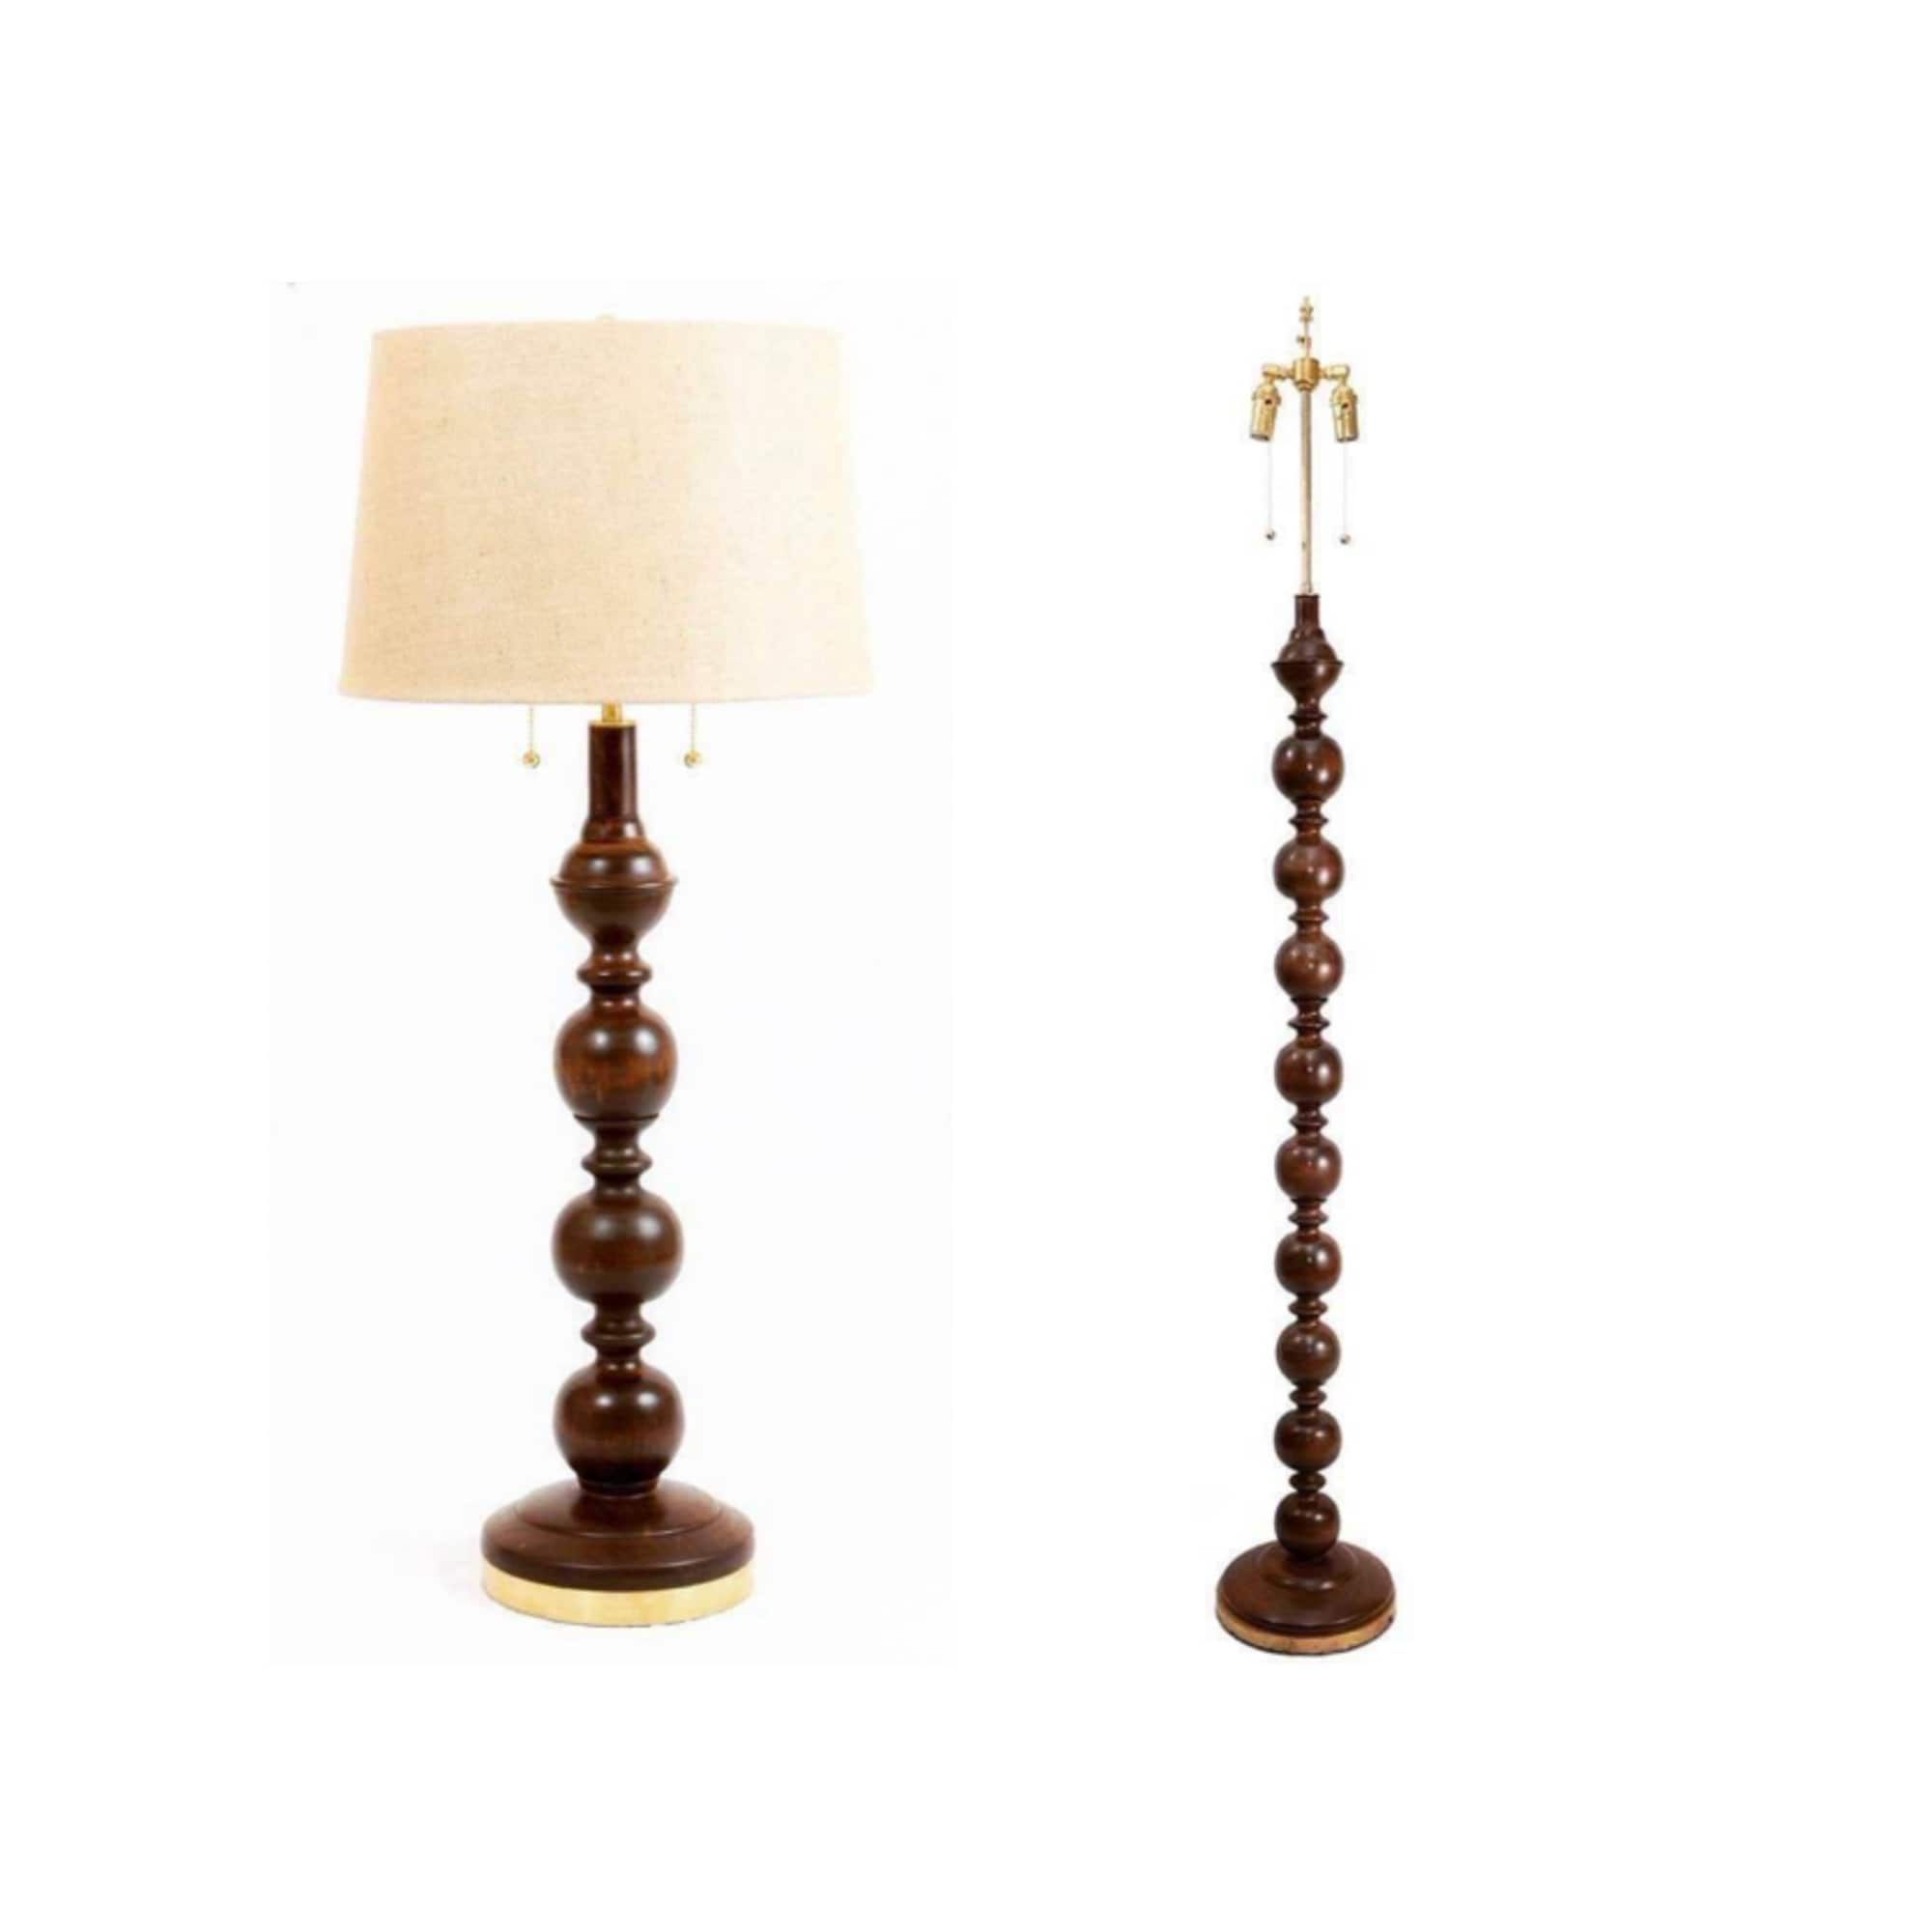 Cherry Floor And Table Lamp Set 2 Table Lamps 1 Floor Lamp – Etsy With Regard To Beeswax Finish Floor Lamps (View 15 of 20)